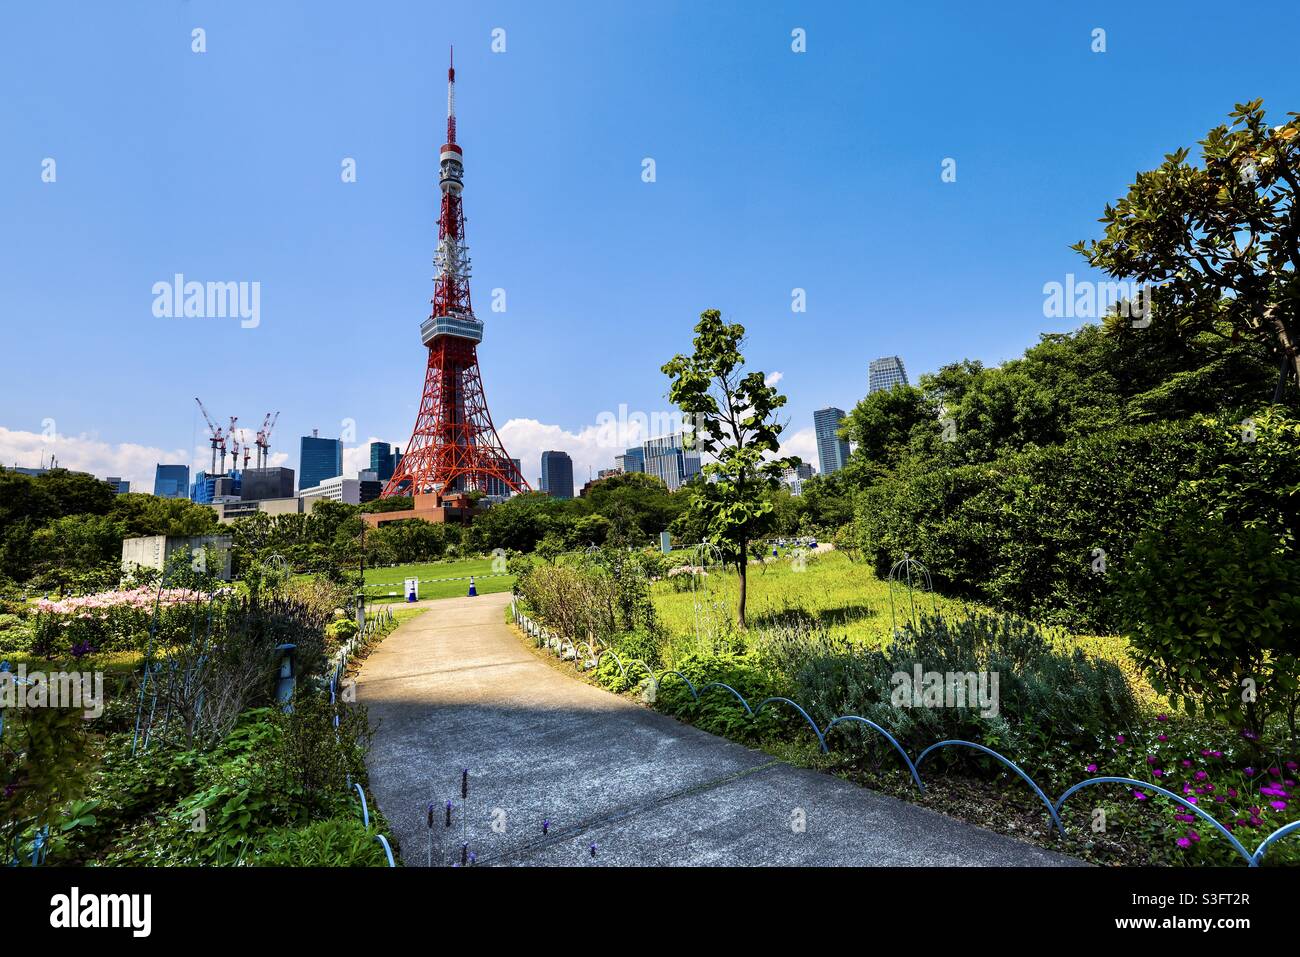 Tokyo Tower is located in 4 Chome 2-8, Shiba Park in Minato Ward, Tokyo, Japan, 2nd tallest Tower in Japan, measuring height 332.9 meters. Stock Photo